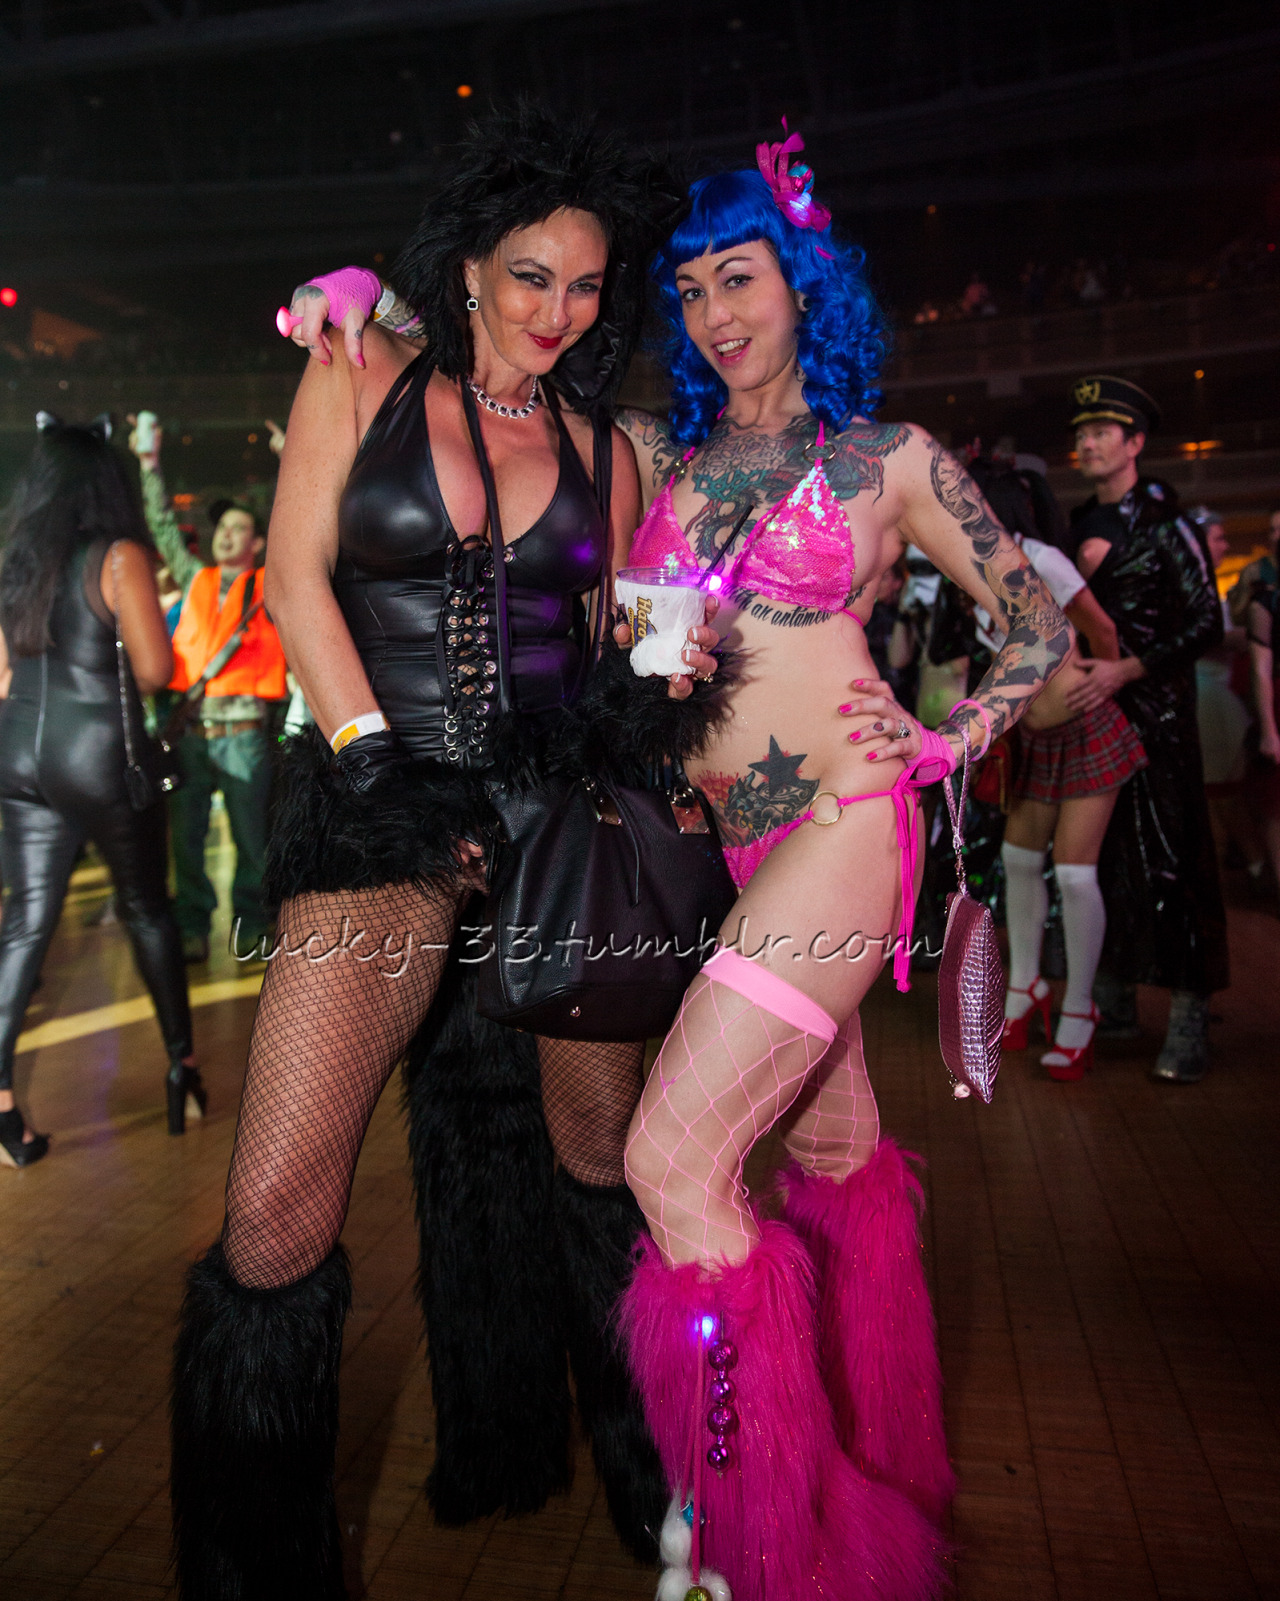 lucky-33: Oct 2016 Fetish &amp; Fantasy Ball The dance floor was quite crowded